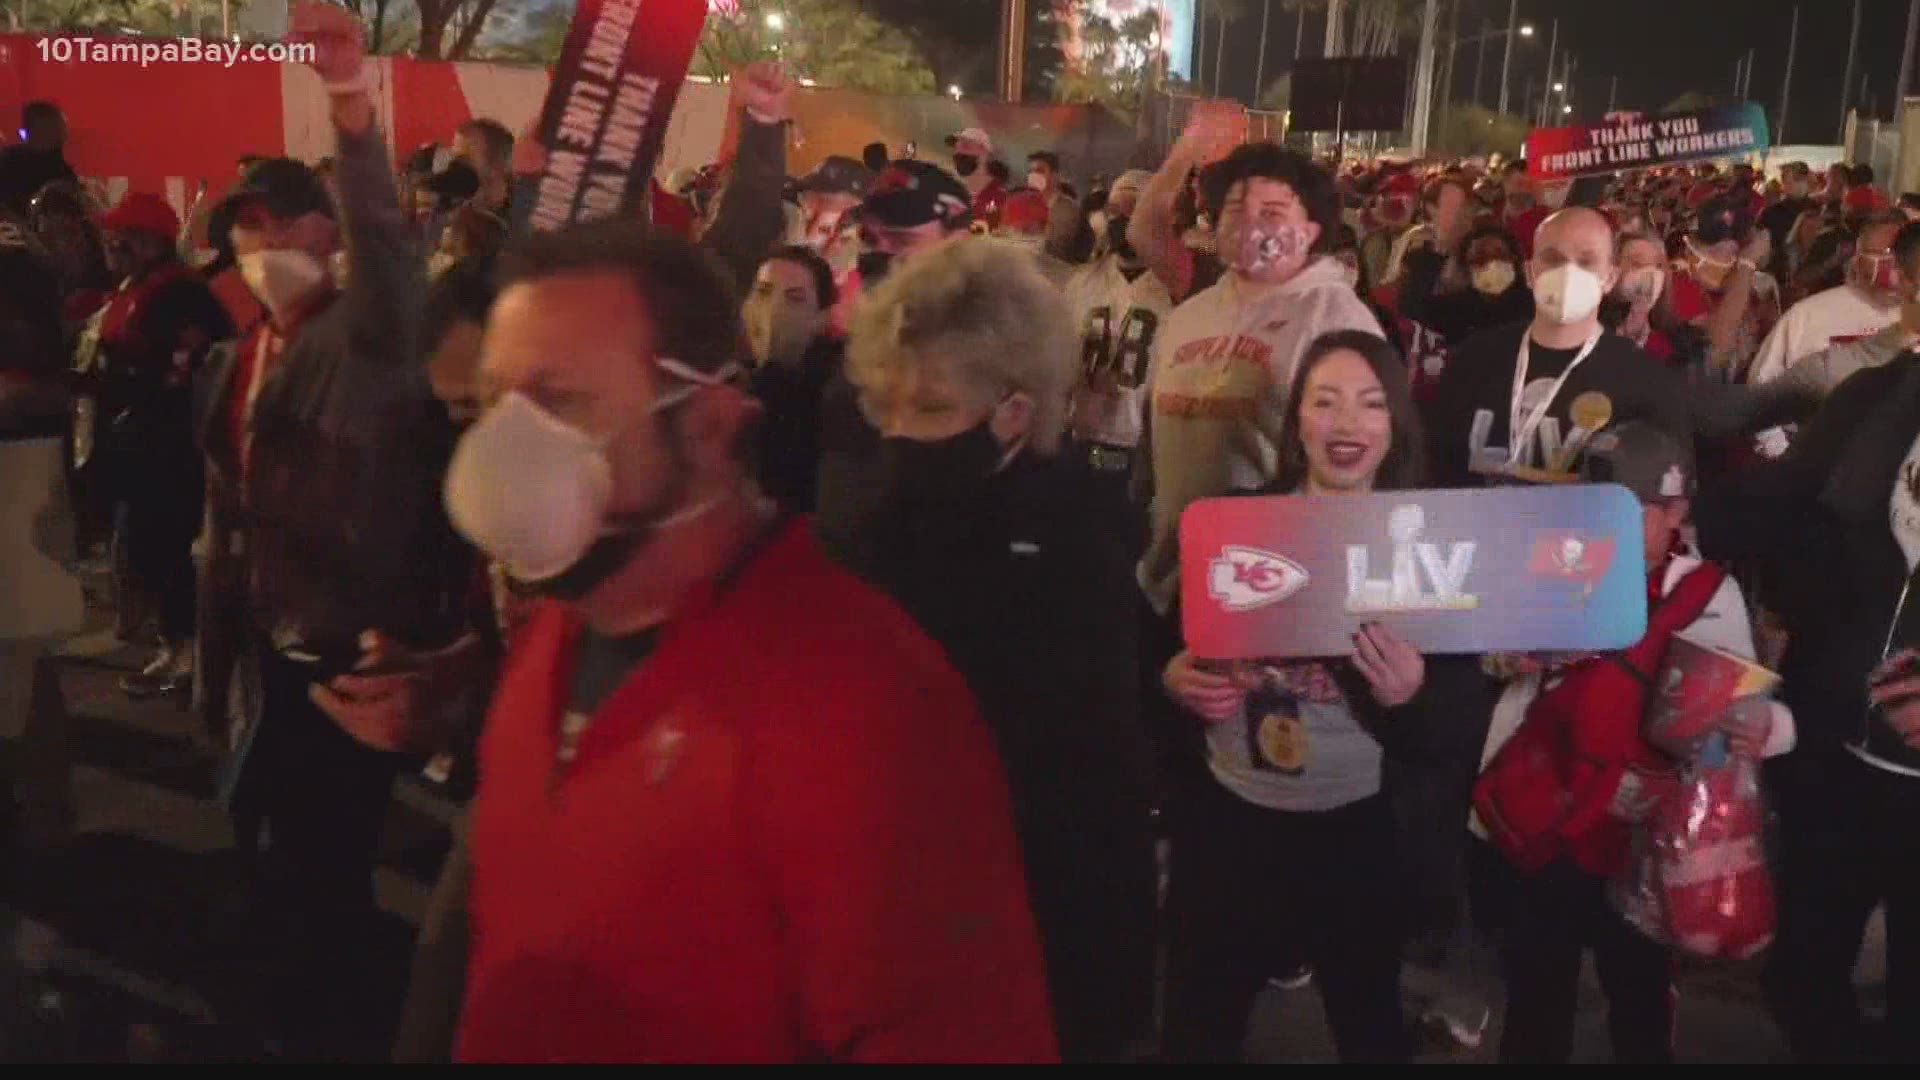 Despite a mandatory mask mandate issued by the City of Tampa, hundreds of videos showed maskless crowds celebrating the Bucs' Super Bowl victory.